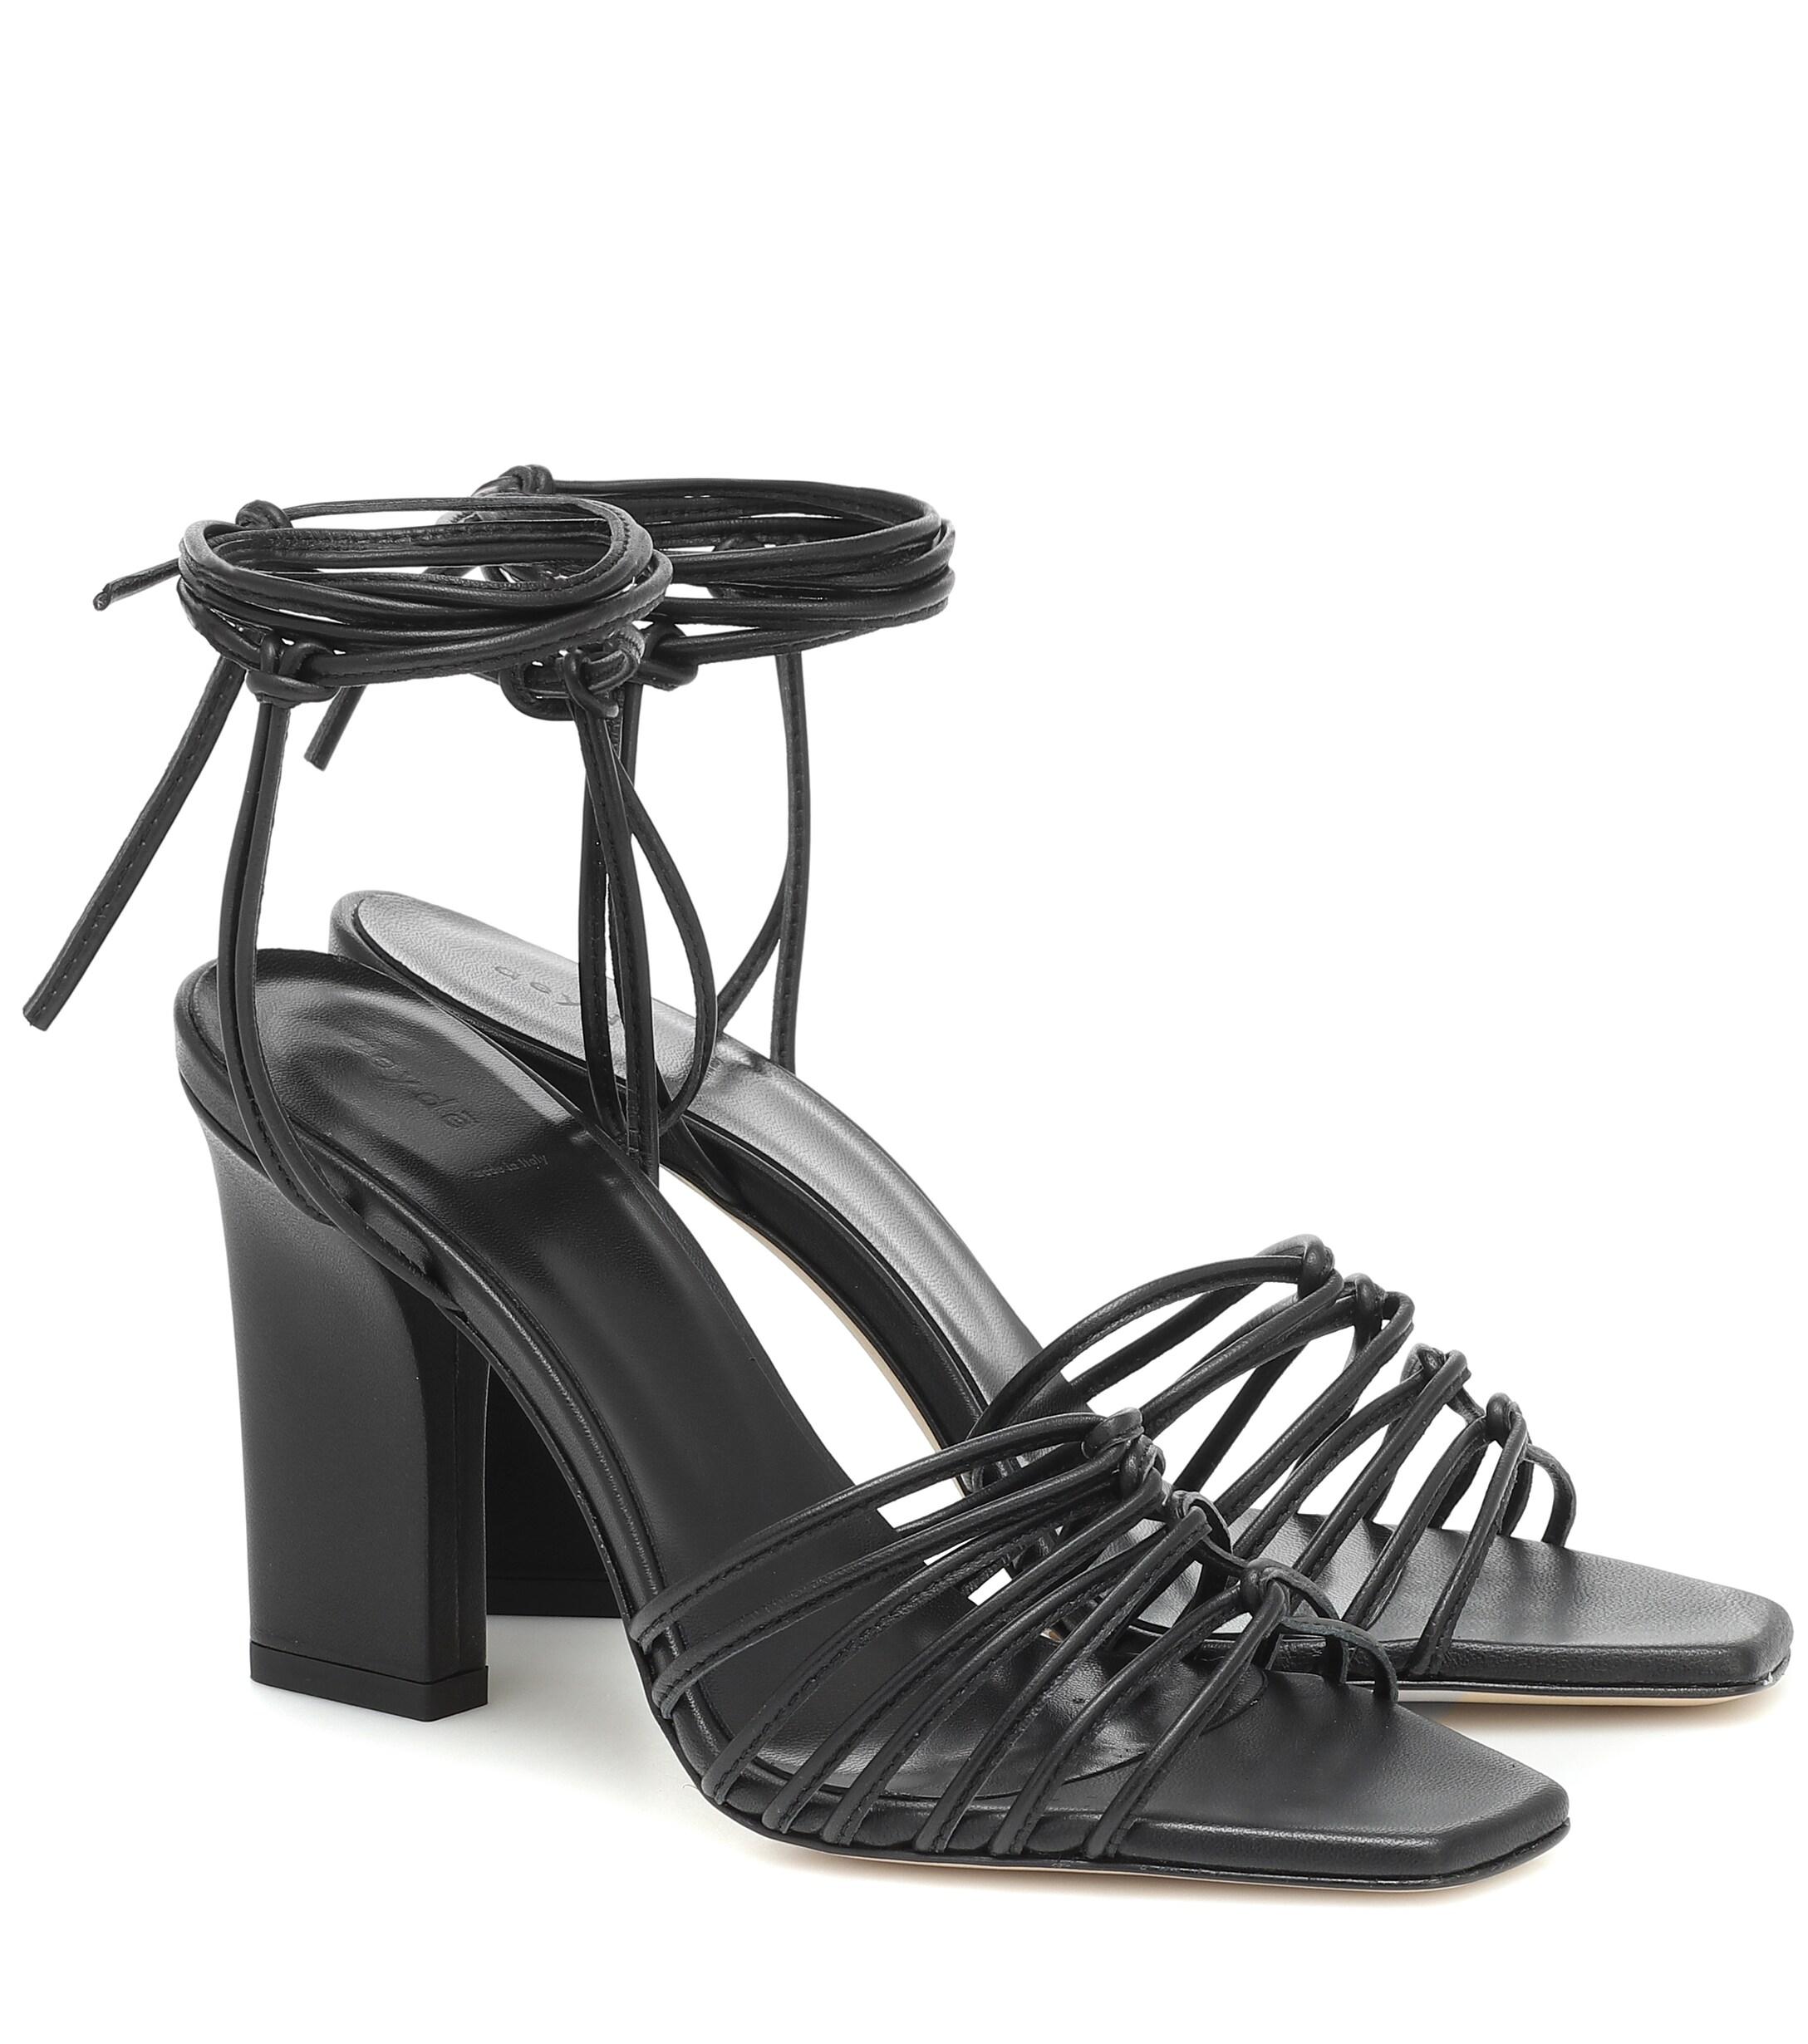 Aeyde Daisy Leather Sandals in Black - Lyst